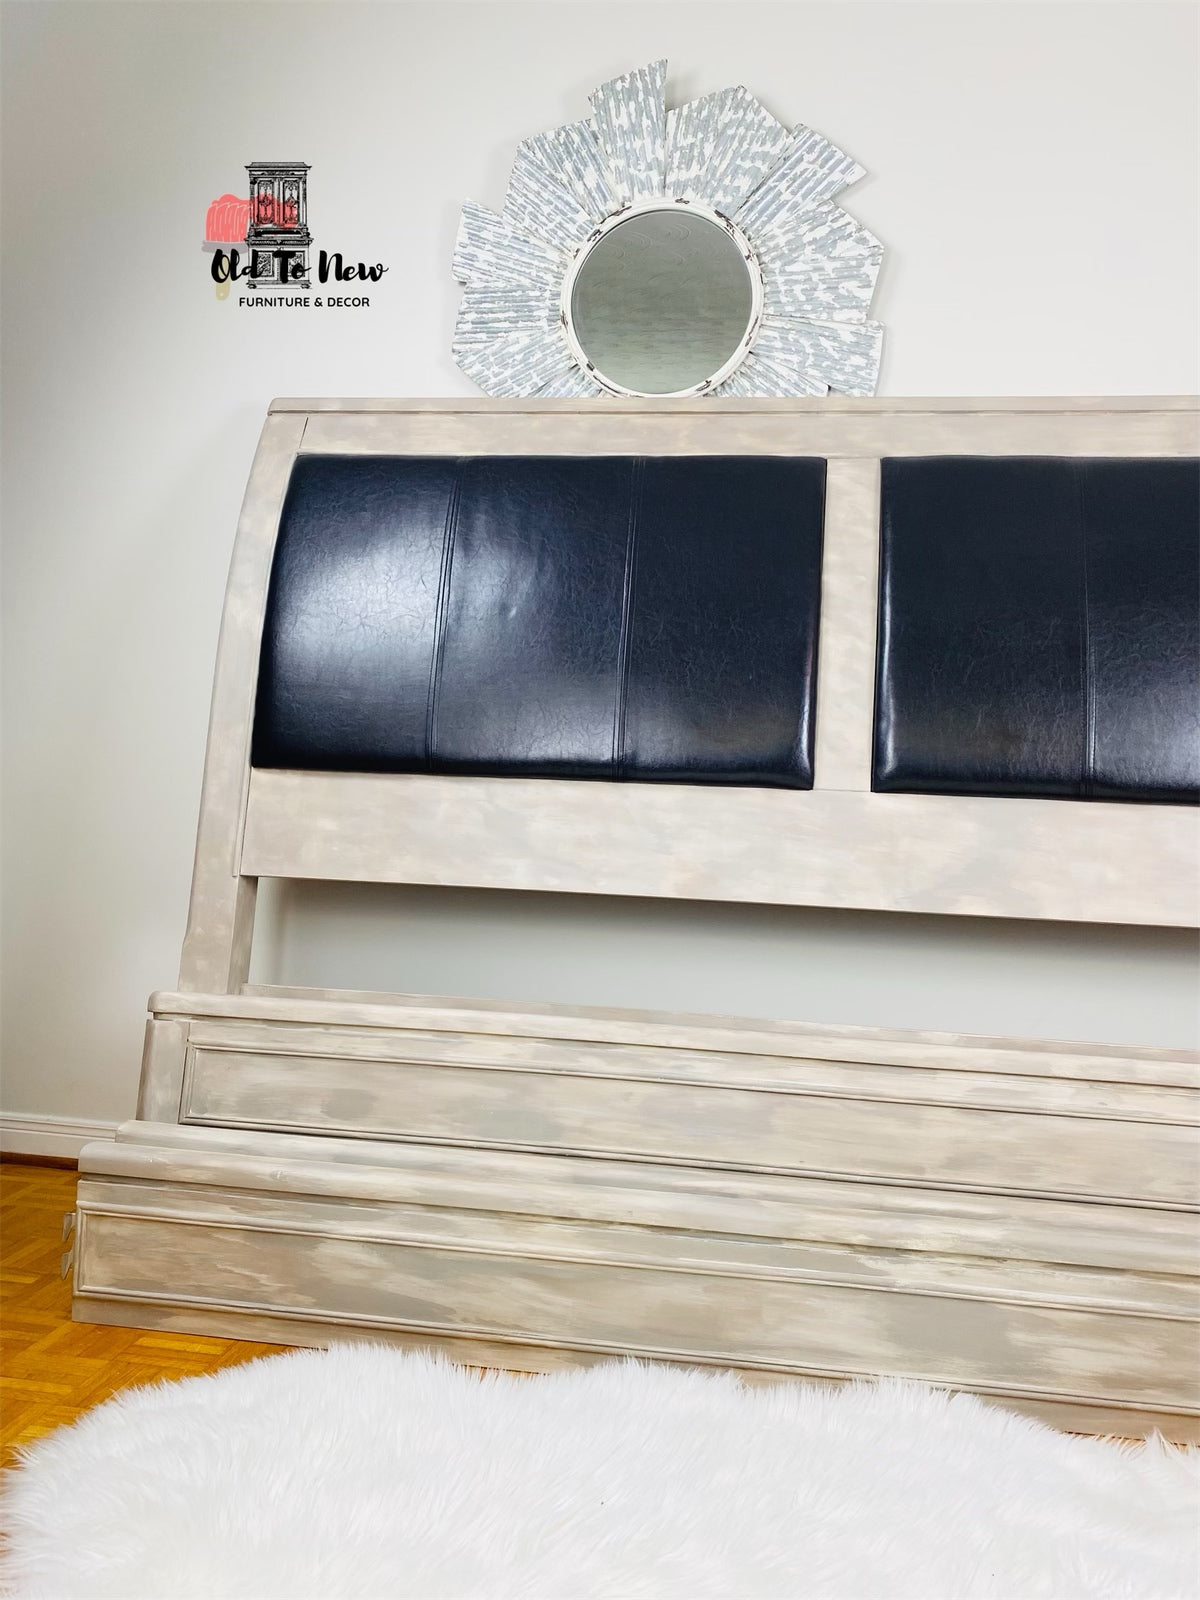 Gorgeous Refinished Modern Farmhouse Bedroom Set Painted With Annie Sloan Chalk Paint